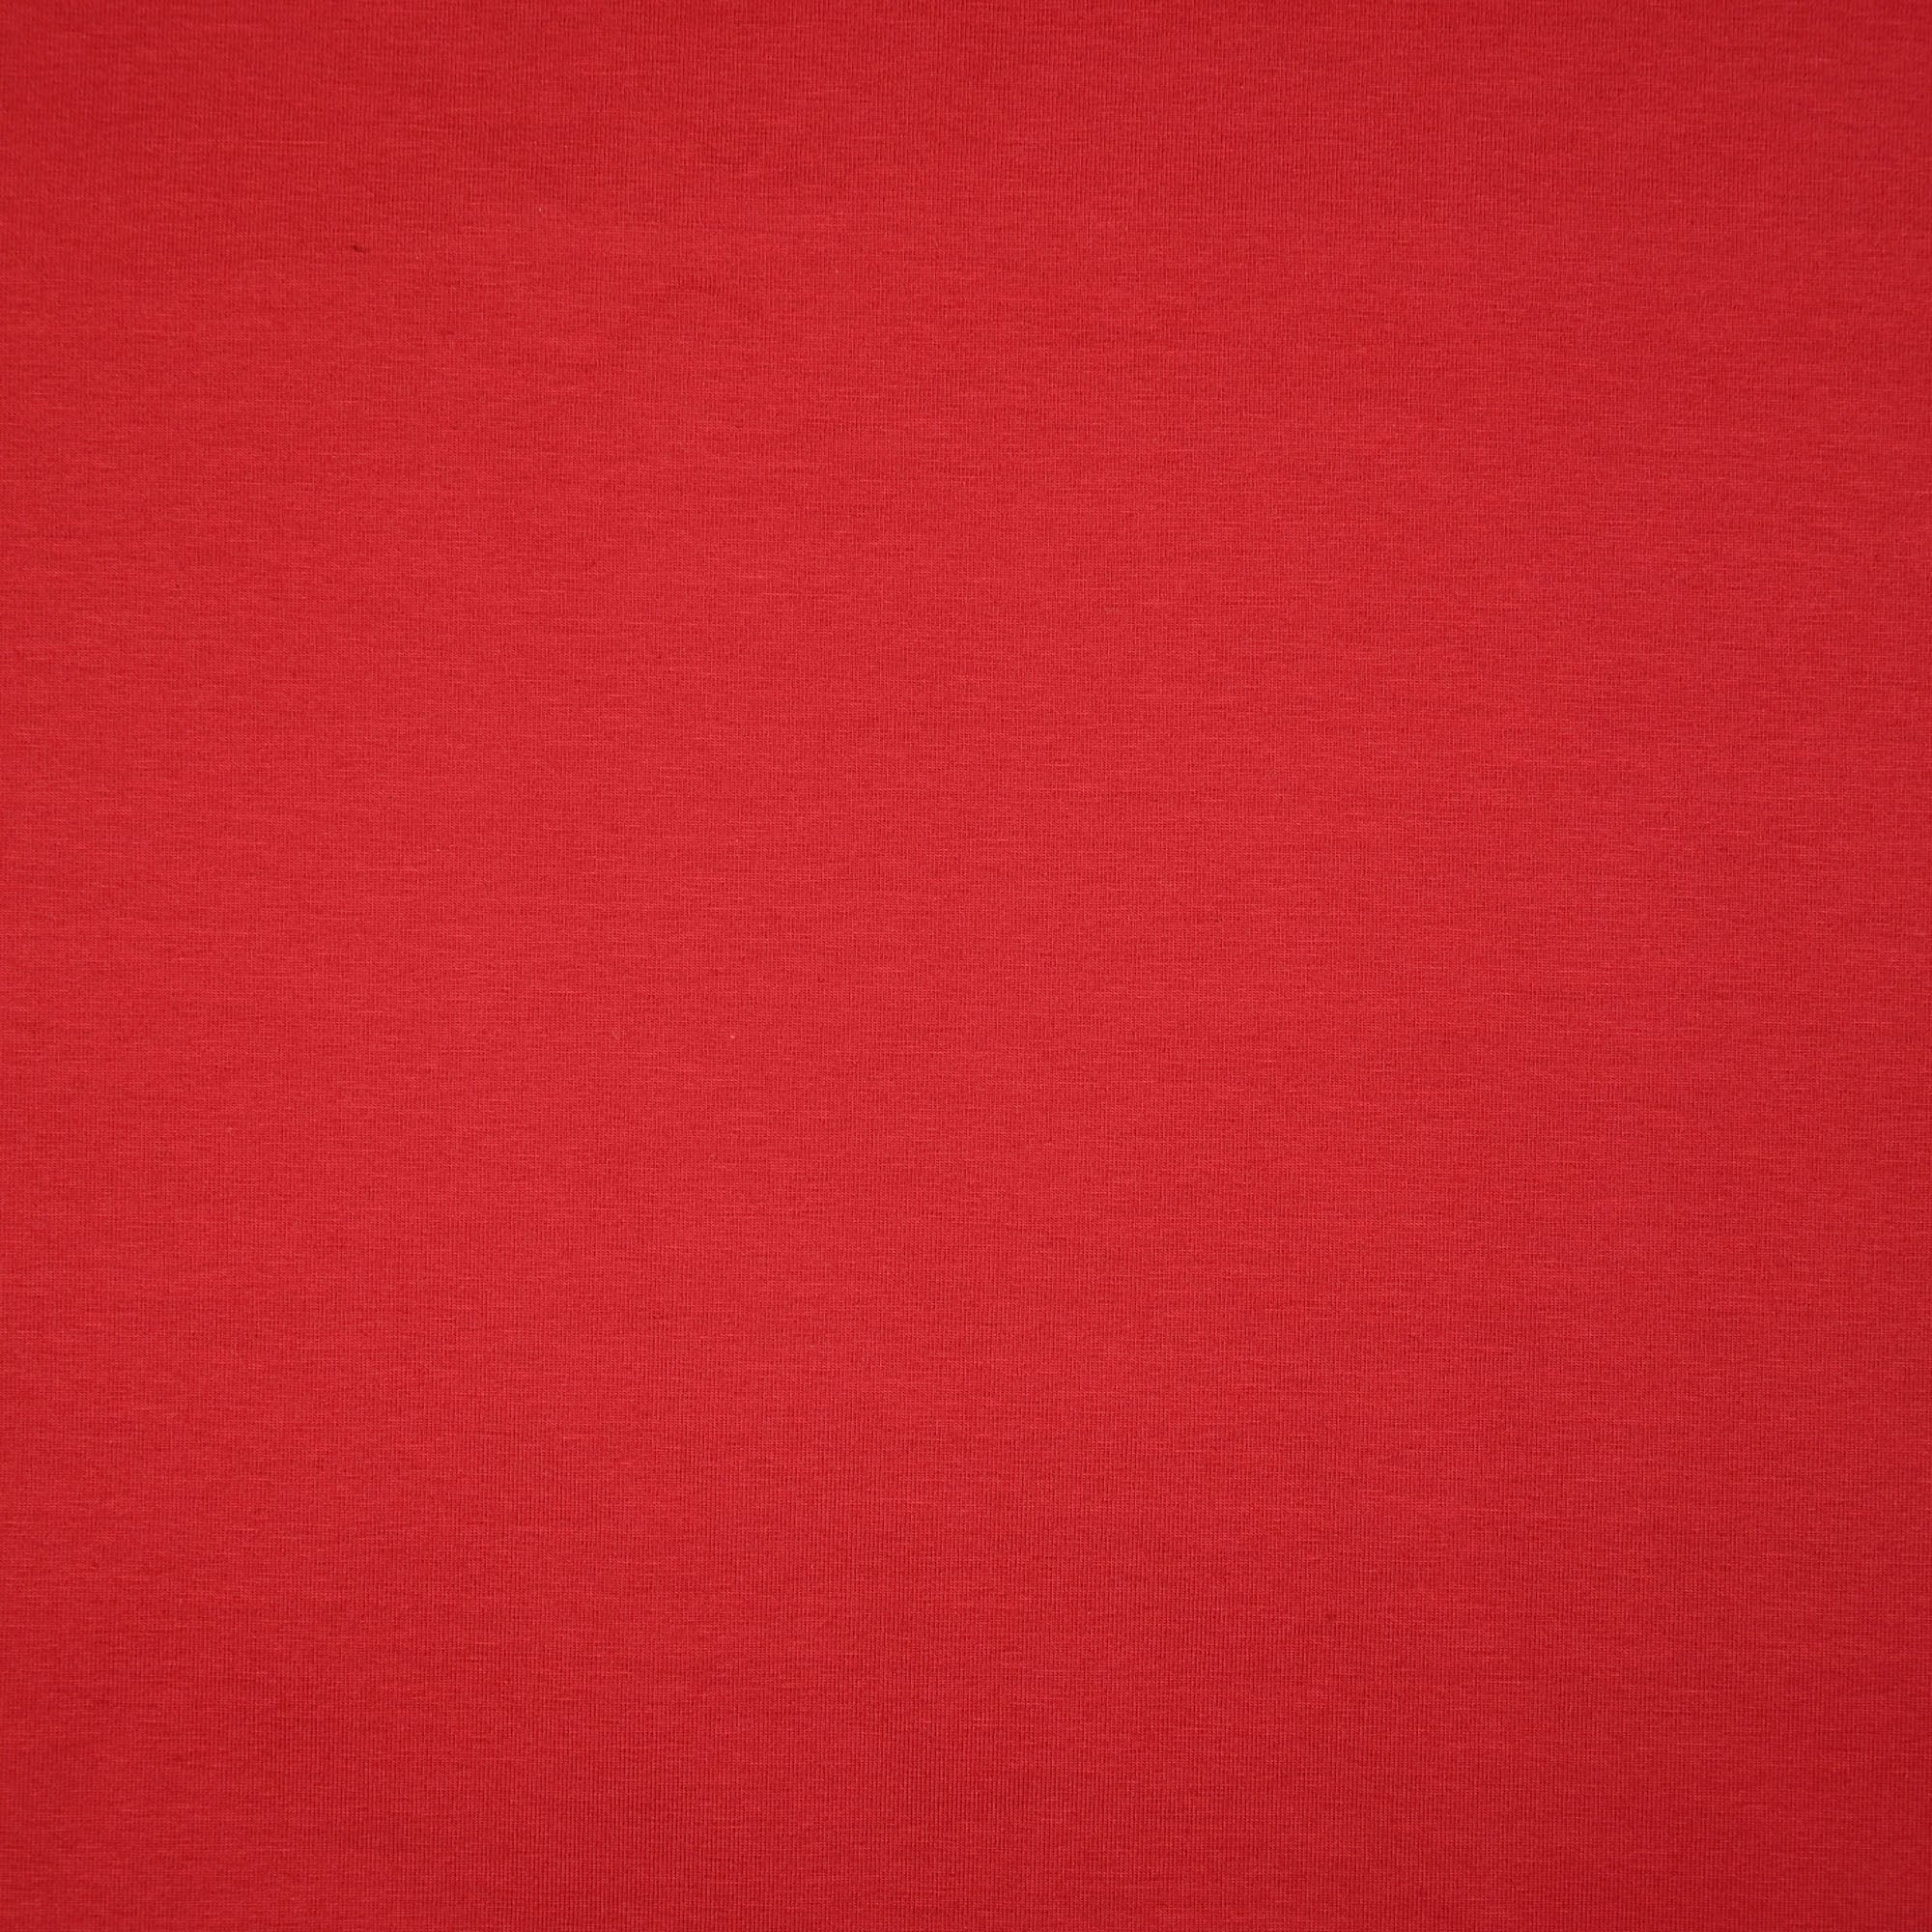 Essential Chic Red Wine Plain Cotton Jersey Fabric